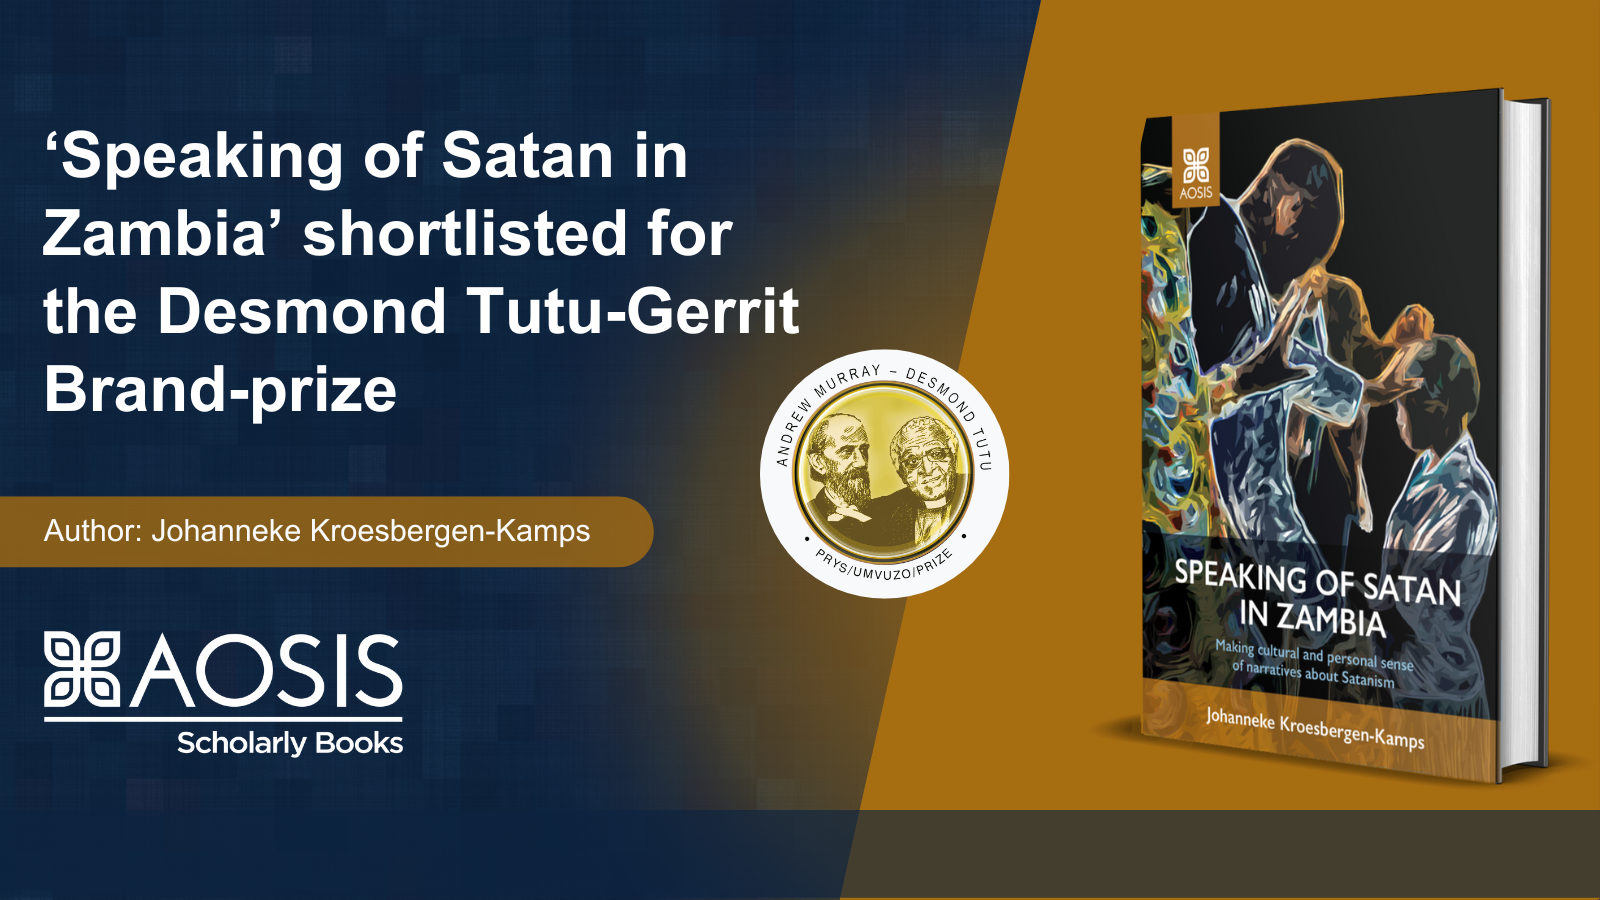 'Speaking of Satan in Zambia' shortlisted for the Desmond Tutu-Gerrit Brand-prize